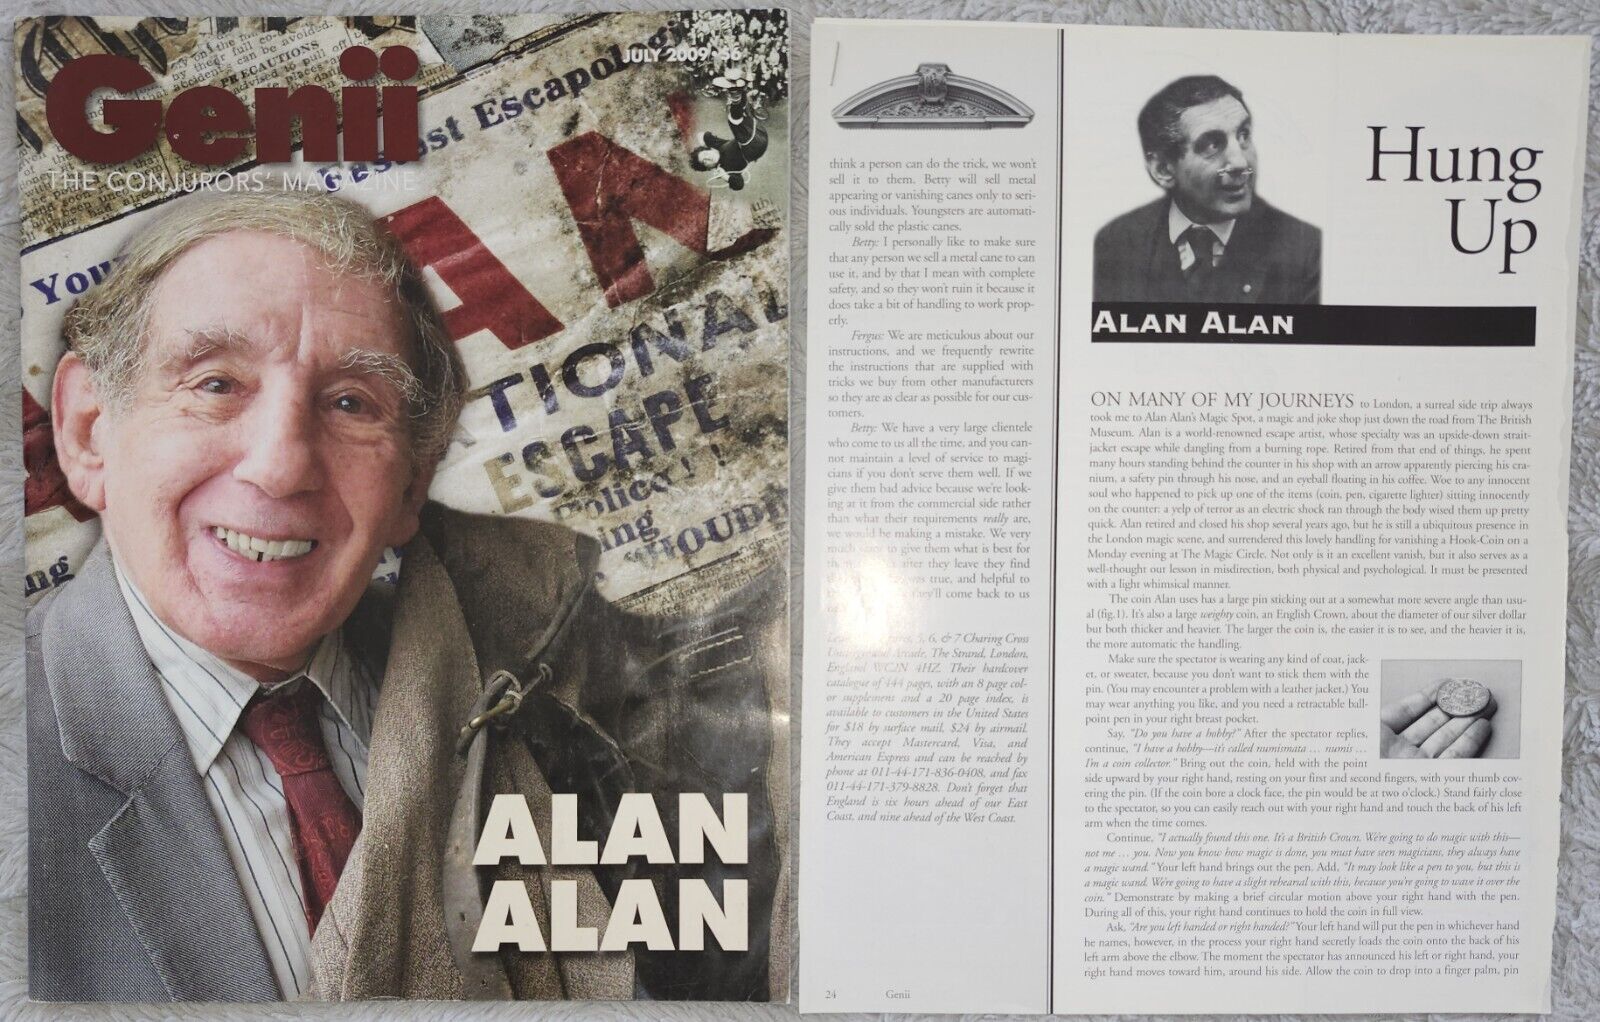 Alan Alan collection Genii magazine July 2009 special issue with him on cover